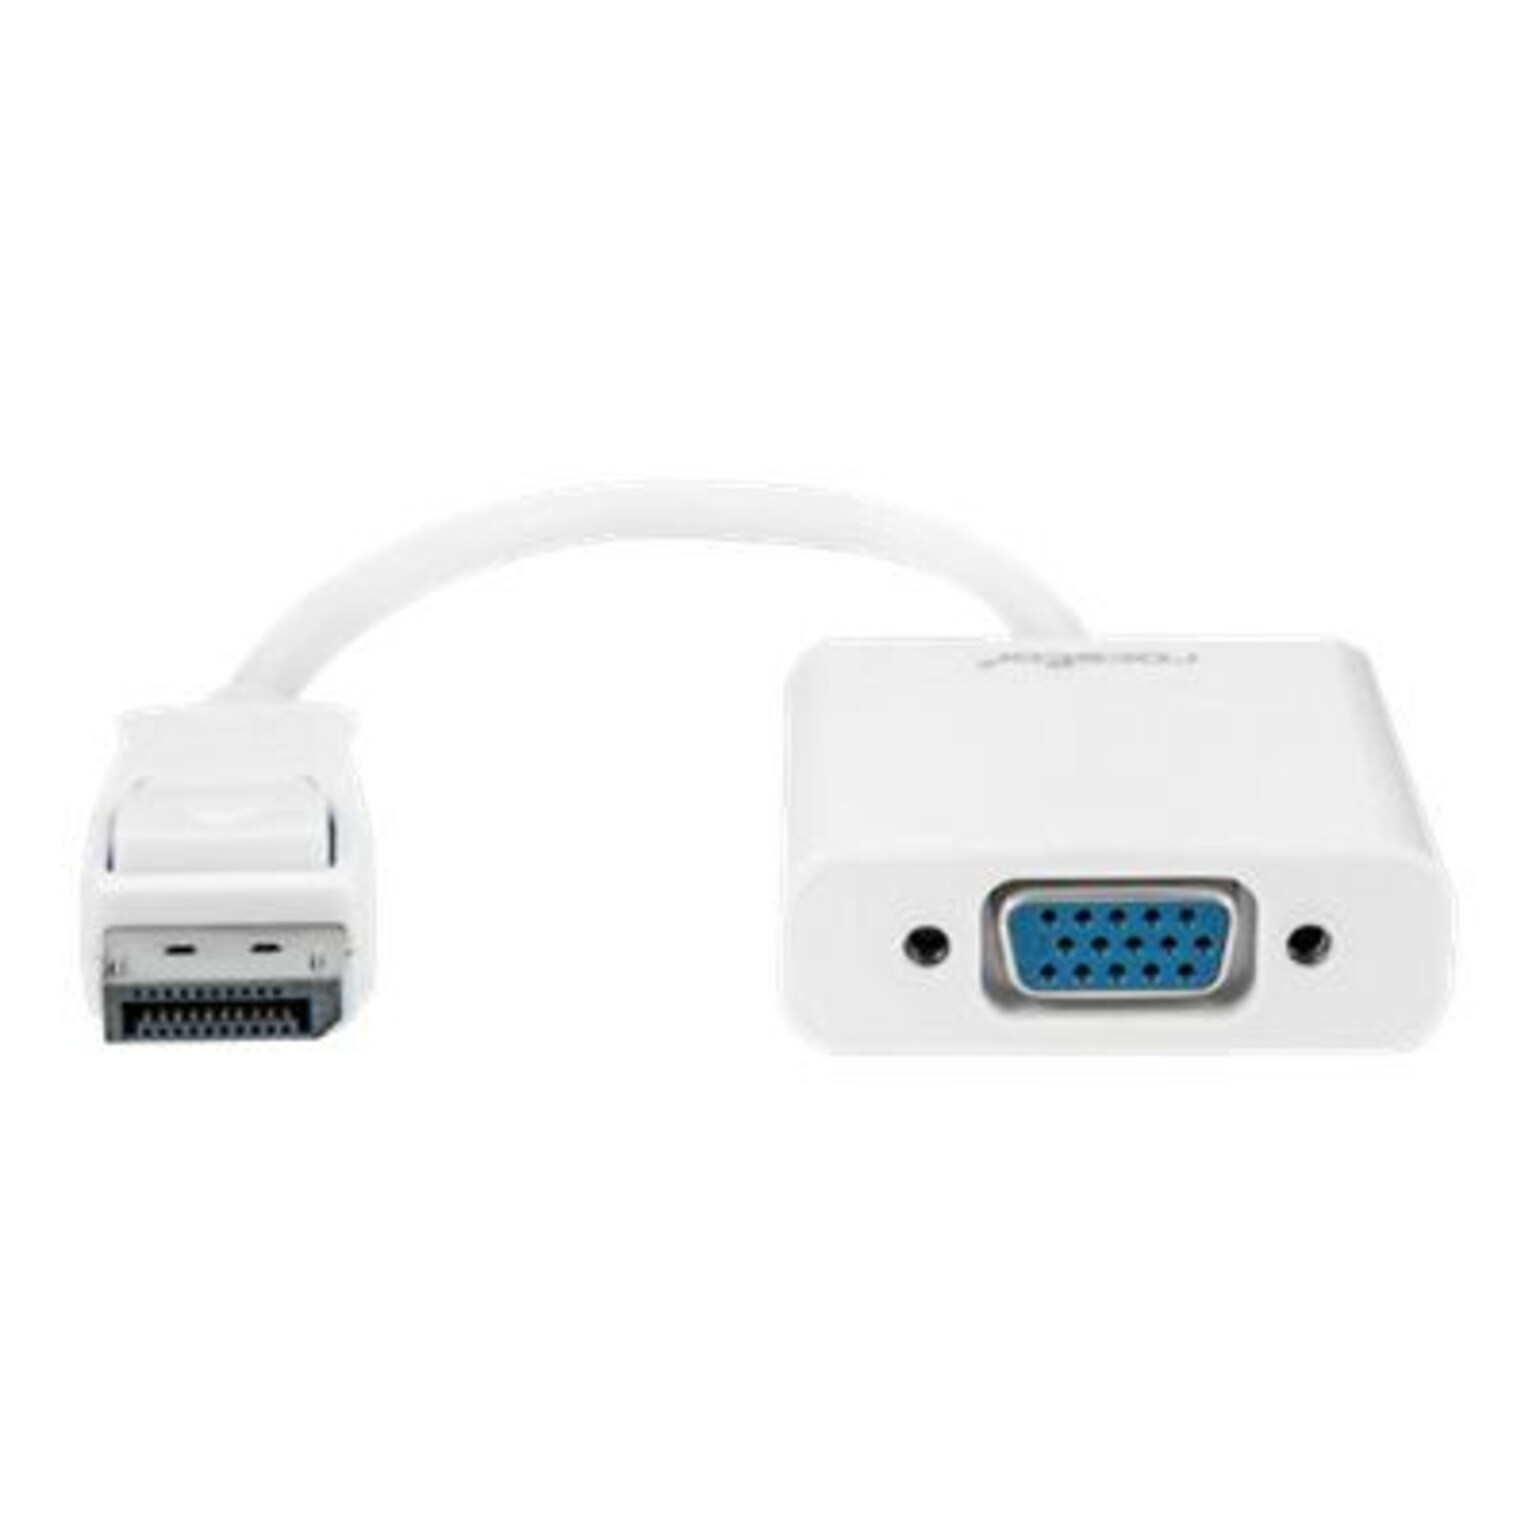 Rocstor® Y10A102-W1 5.9 DisplayPort to VGA Video Adapter Converter; White